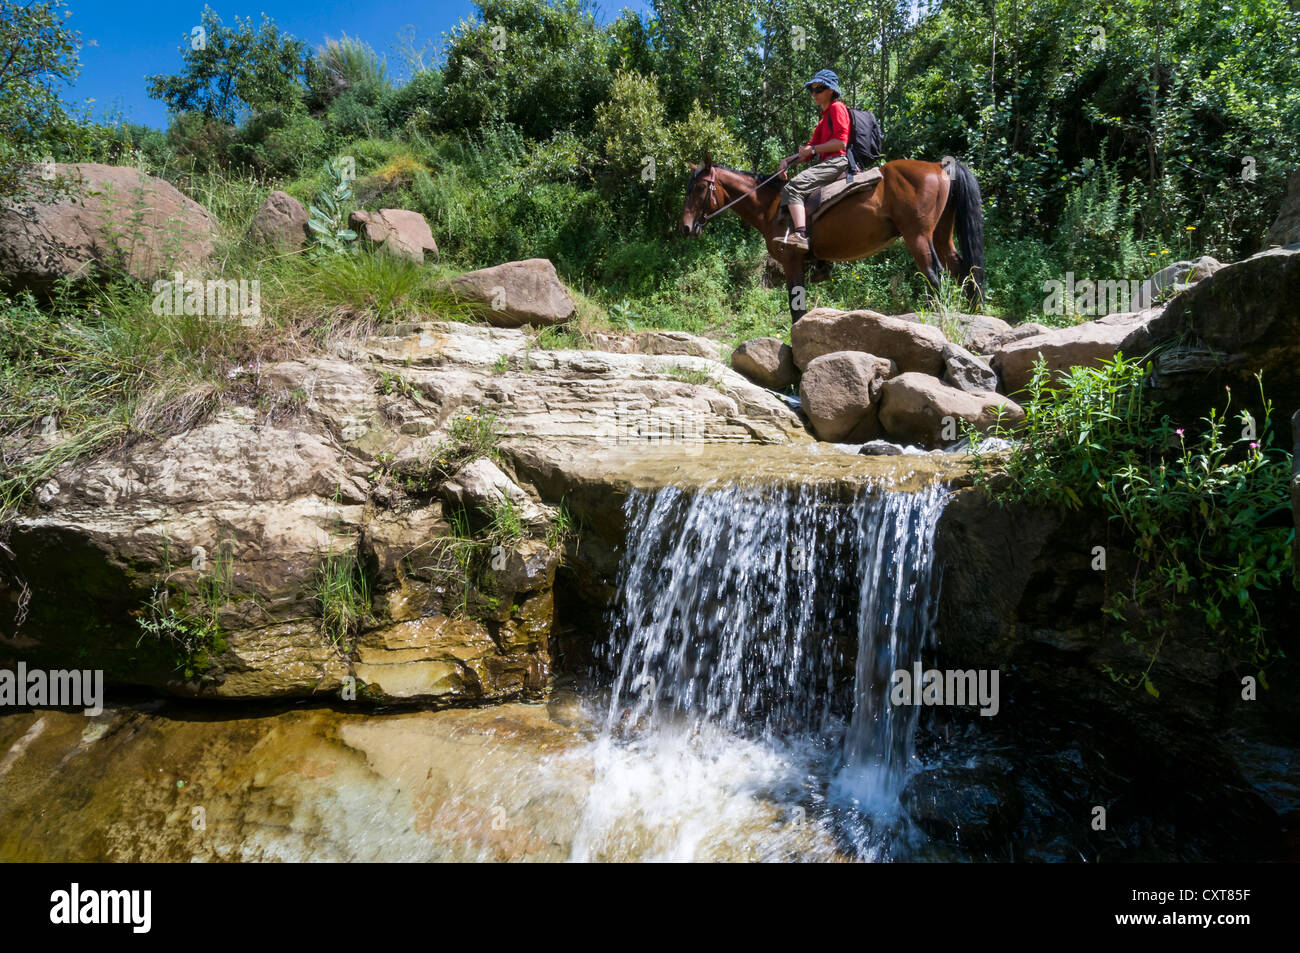 Woman riding on horseback, small waterfall, Highlands, Kingdom of Lesotho, Africa Stock Photo